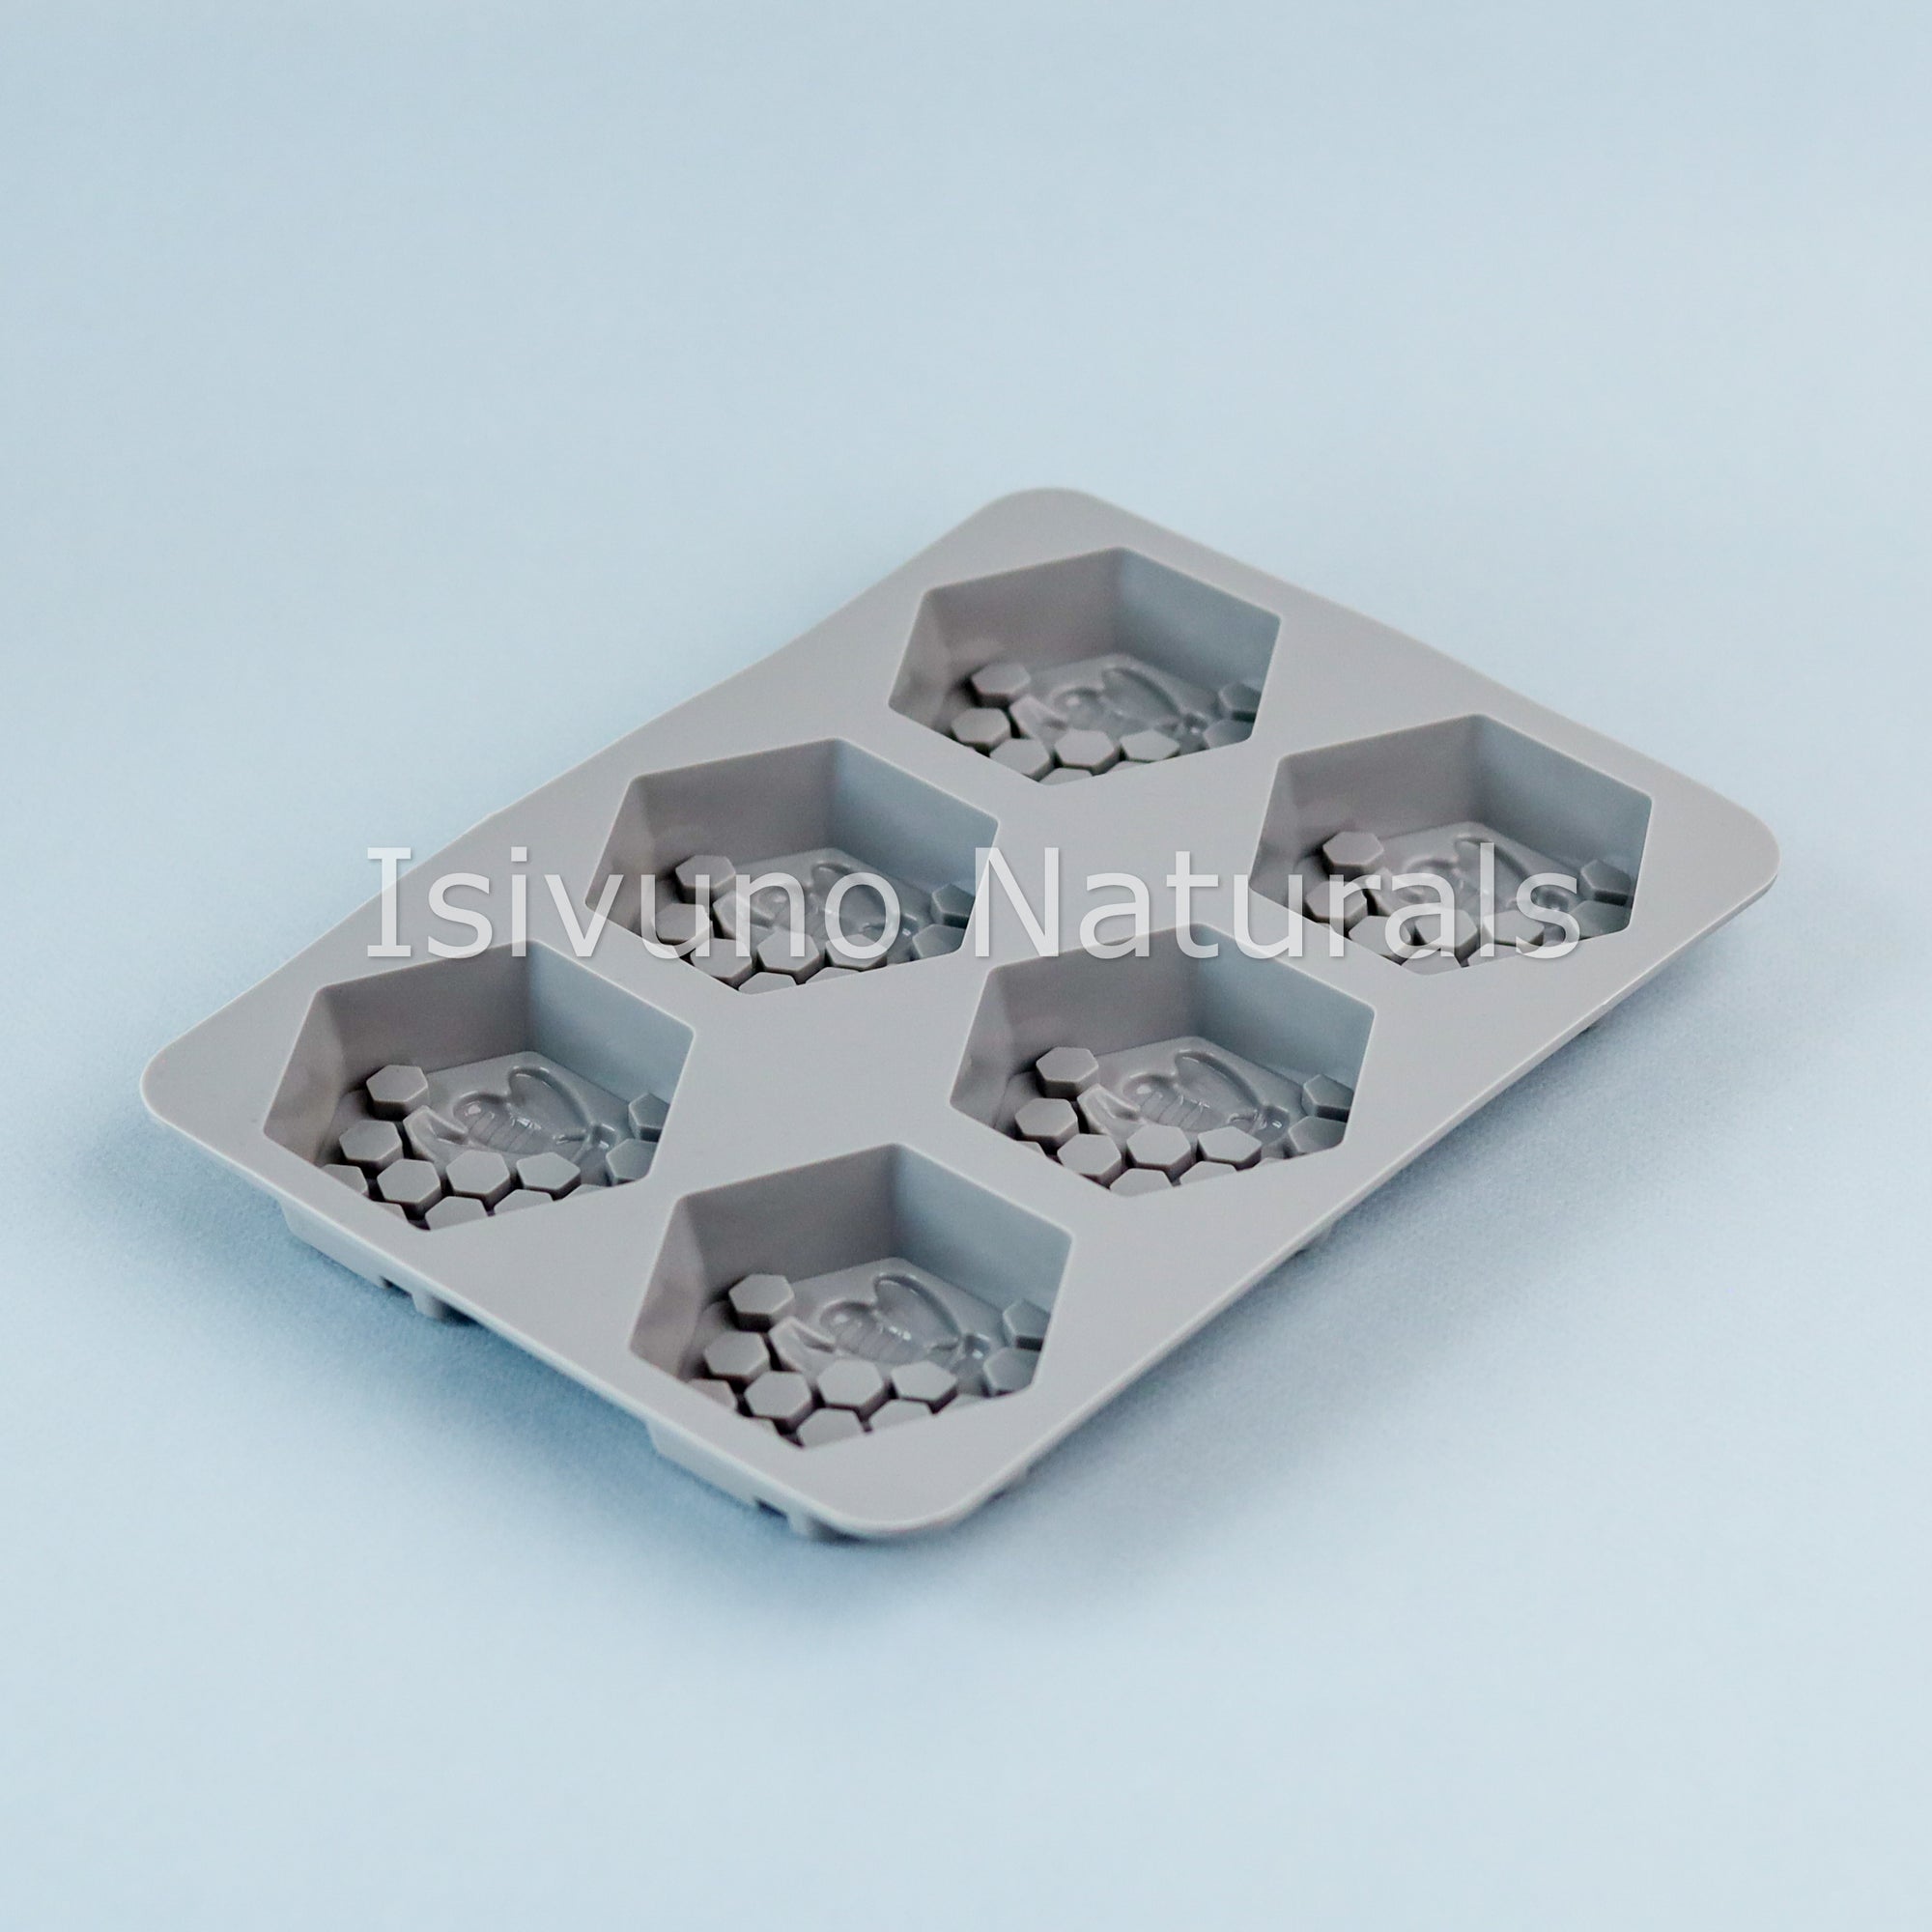 Silicone Soap Mold - Honeycomb